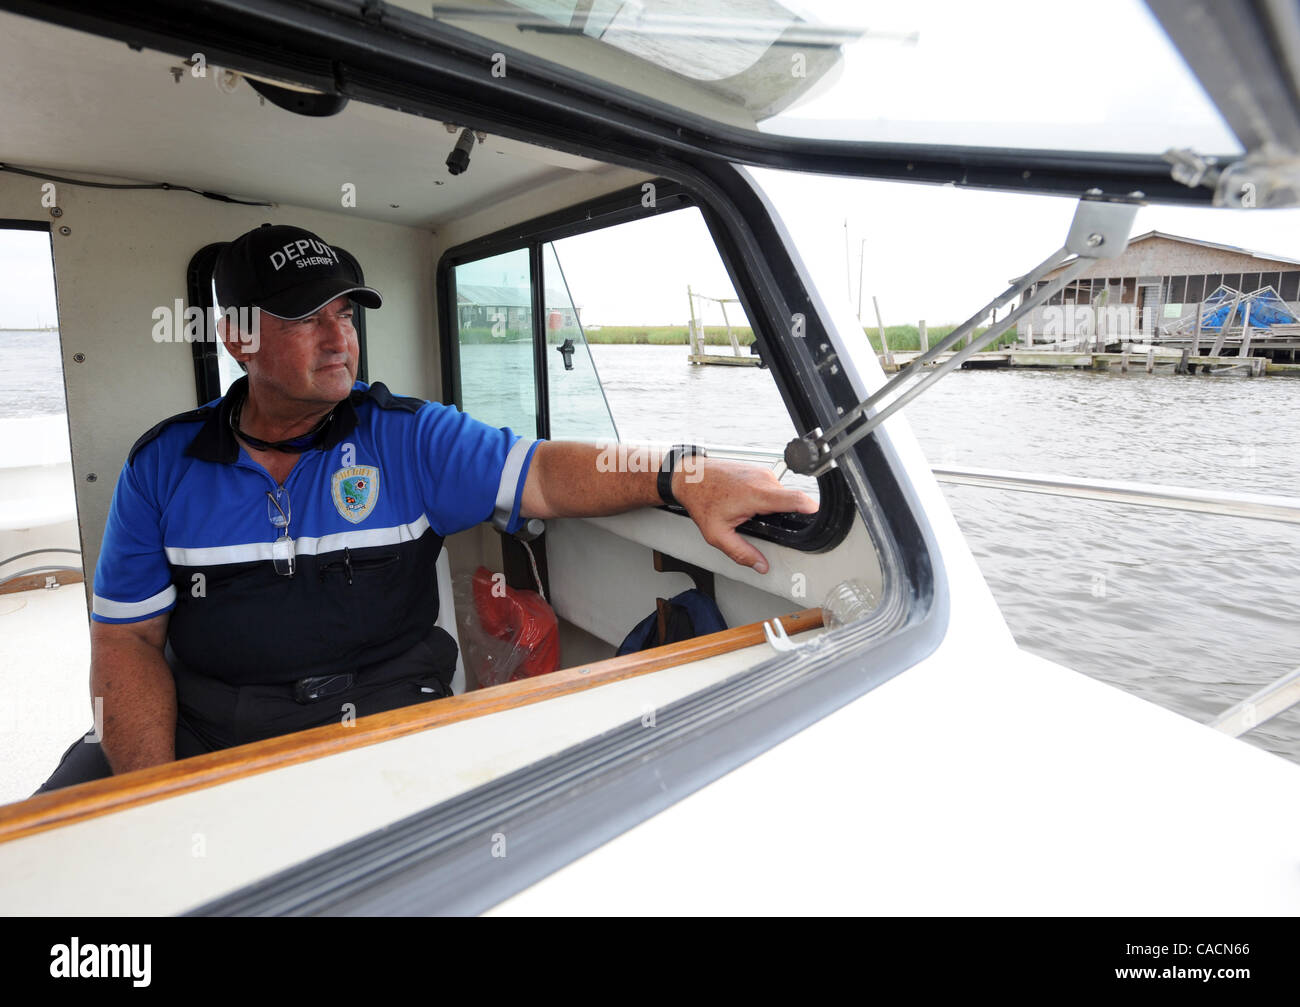 June 22, 2010 - Venice, LOUISIANA, U.S. - Plaquemines Sheriff Department marine division member Deputy Louis Fernandez keeps an eye on the Grand Bayou community of Barataria Bay near Port Sulphur, Louisiana, USA 22 June 2010. The unit has had to rescue several cleanup workers who have gotten lost or Stock Photo